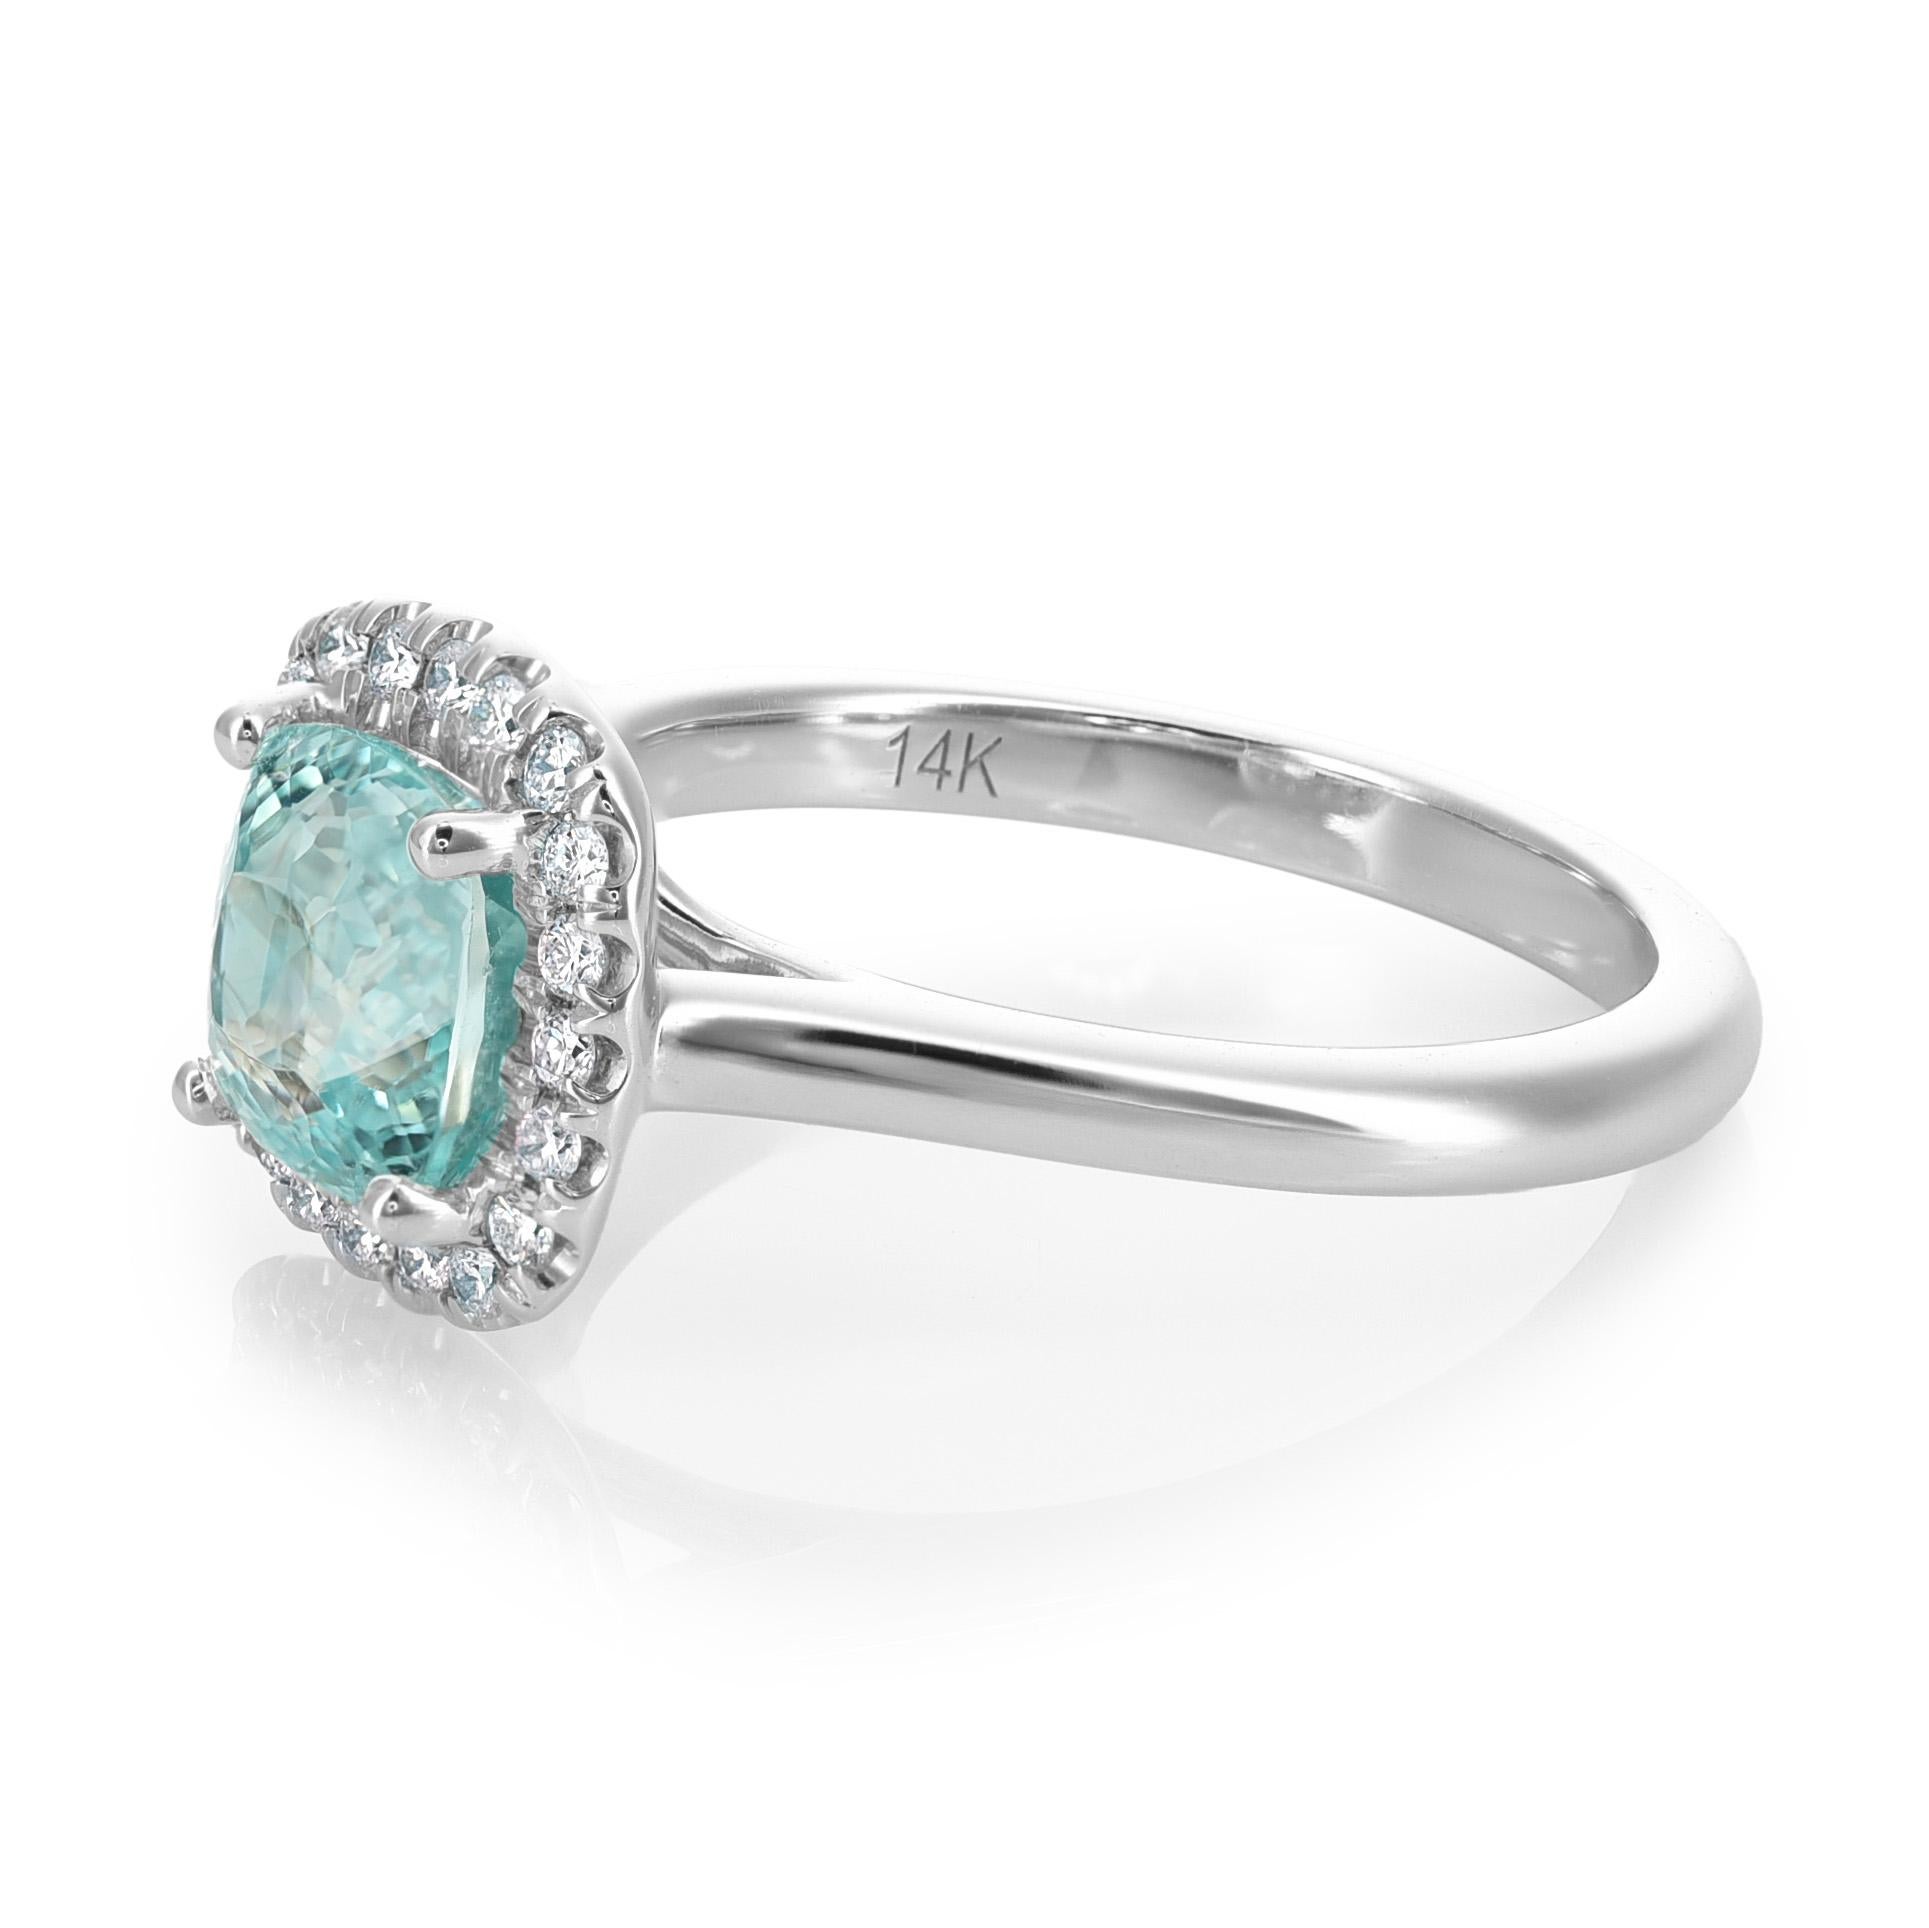 Indulge in timeless beauty with this 14K White Gold Ring featuring 1.90 carats natural Paraiba Tourmaline in an elegant oval shape. The vibrant blue-green hues of the Paraiba Tourmaline are enhanced through a carefully applied heating process,